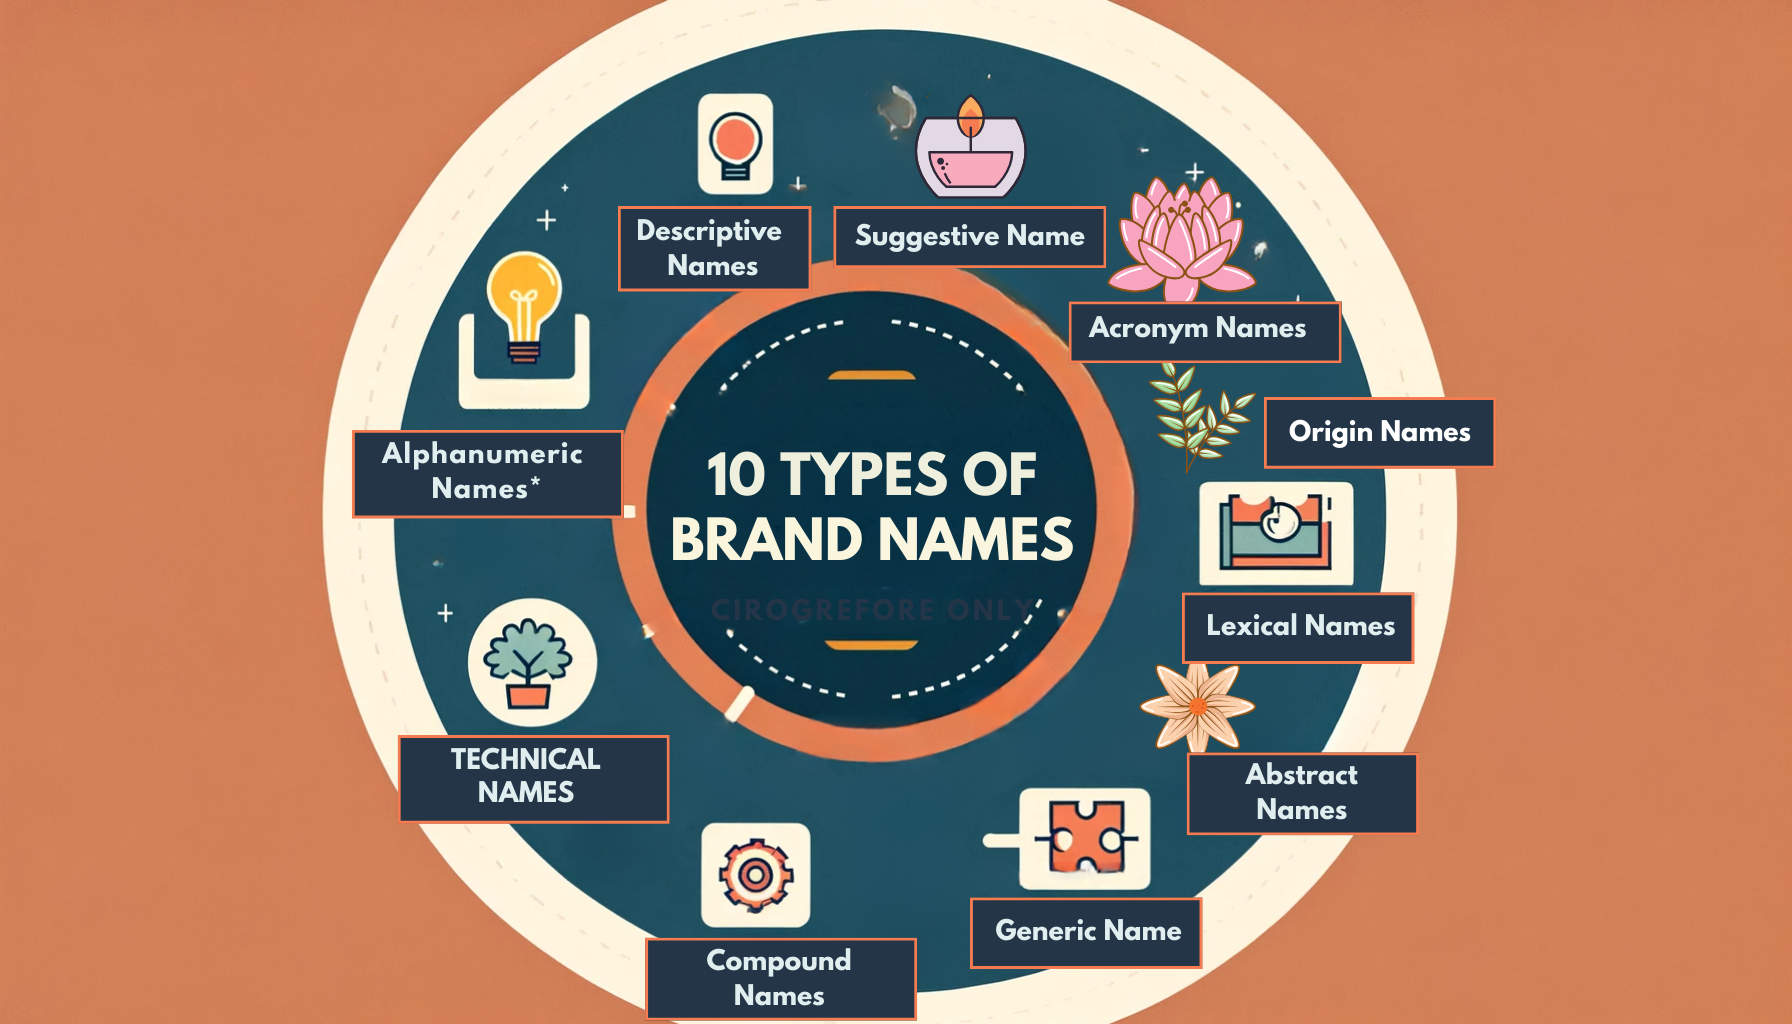 THE 10 TYPES OF BRAND NAMES